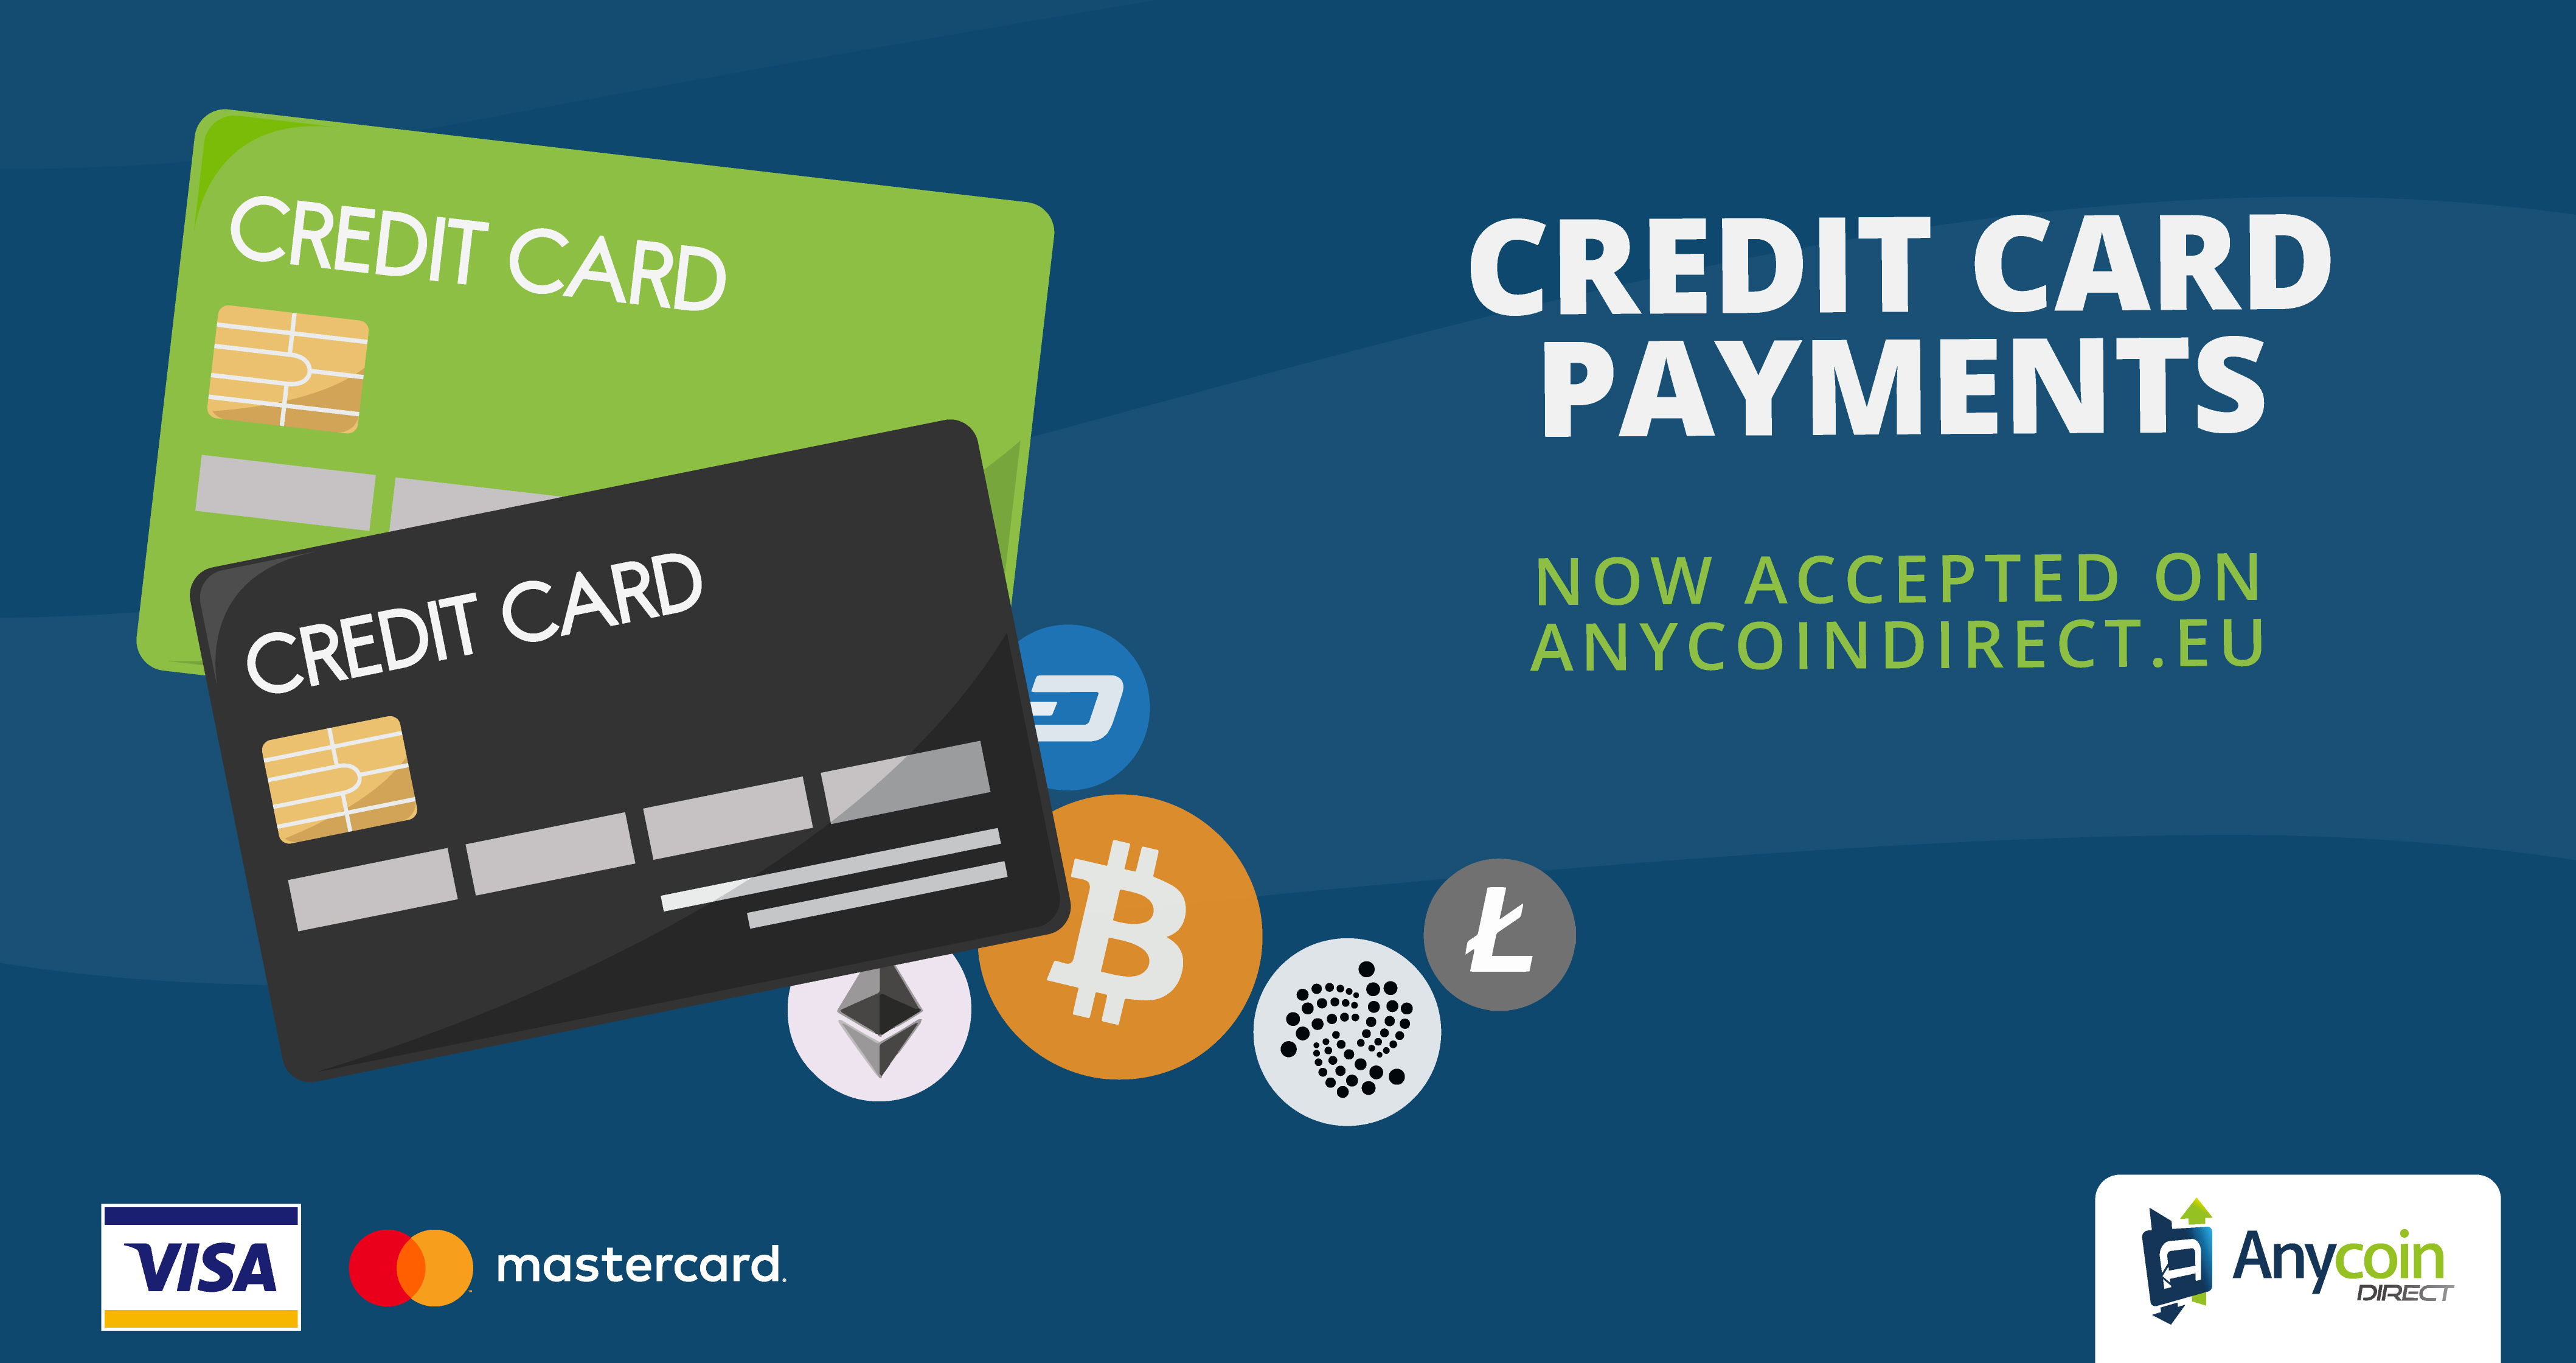 Anycoin Direct Now Accepts Credit Card Payments On Their Platform